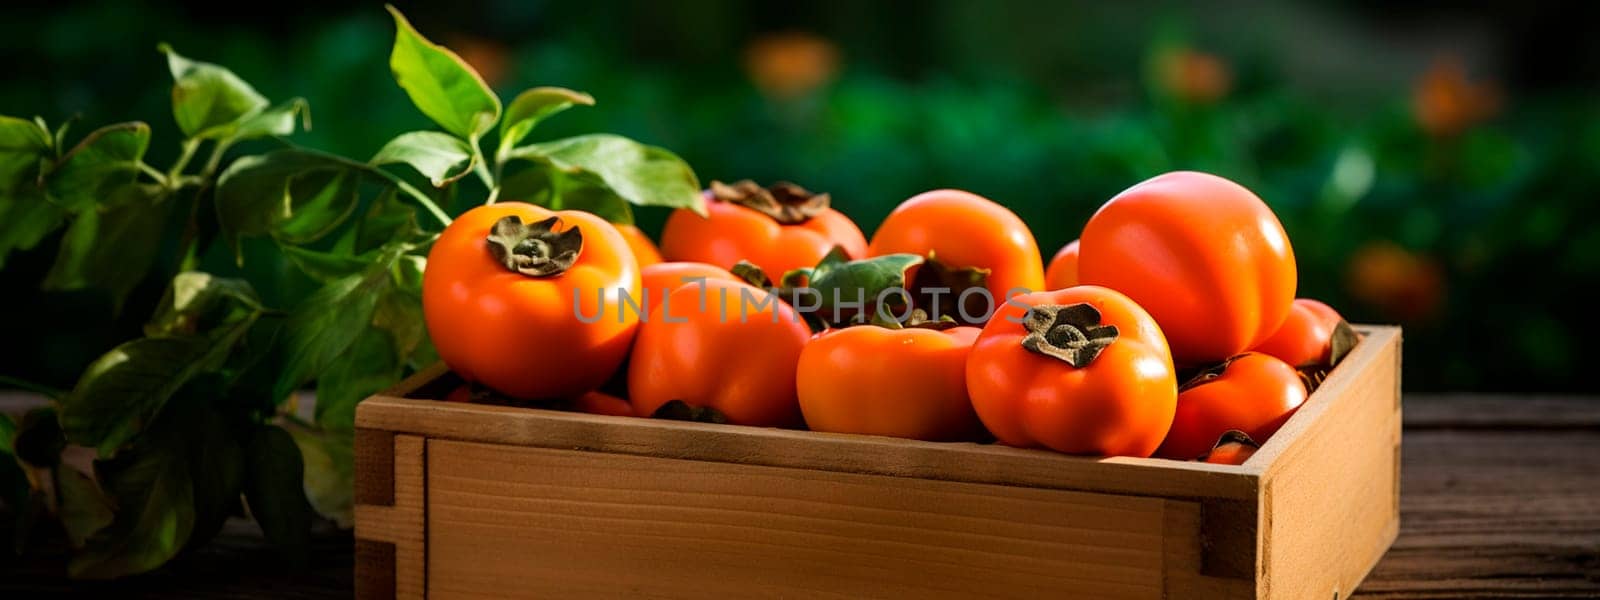 Persimmon harvest in a box in the garden. Selective focus. by yanadjana